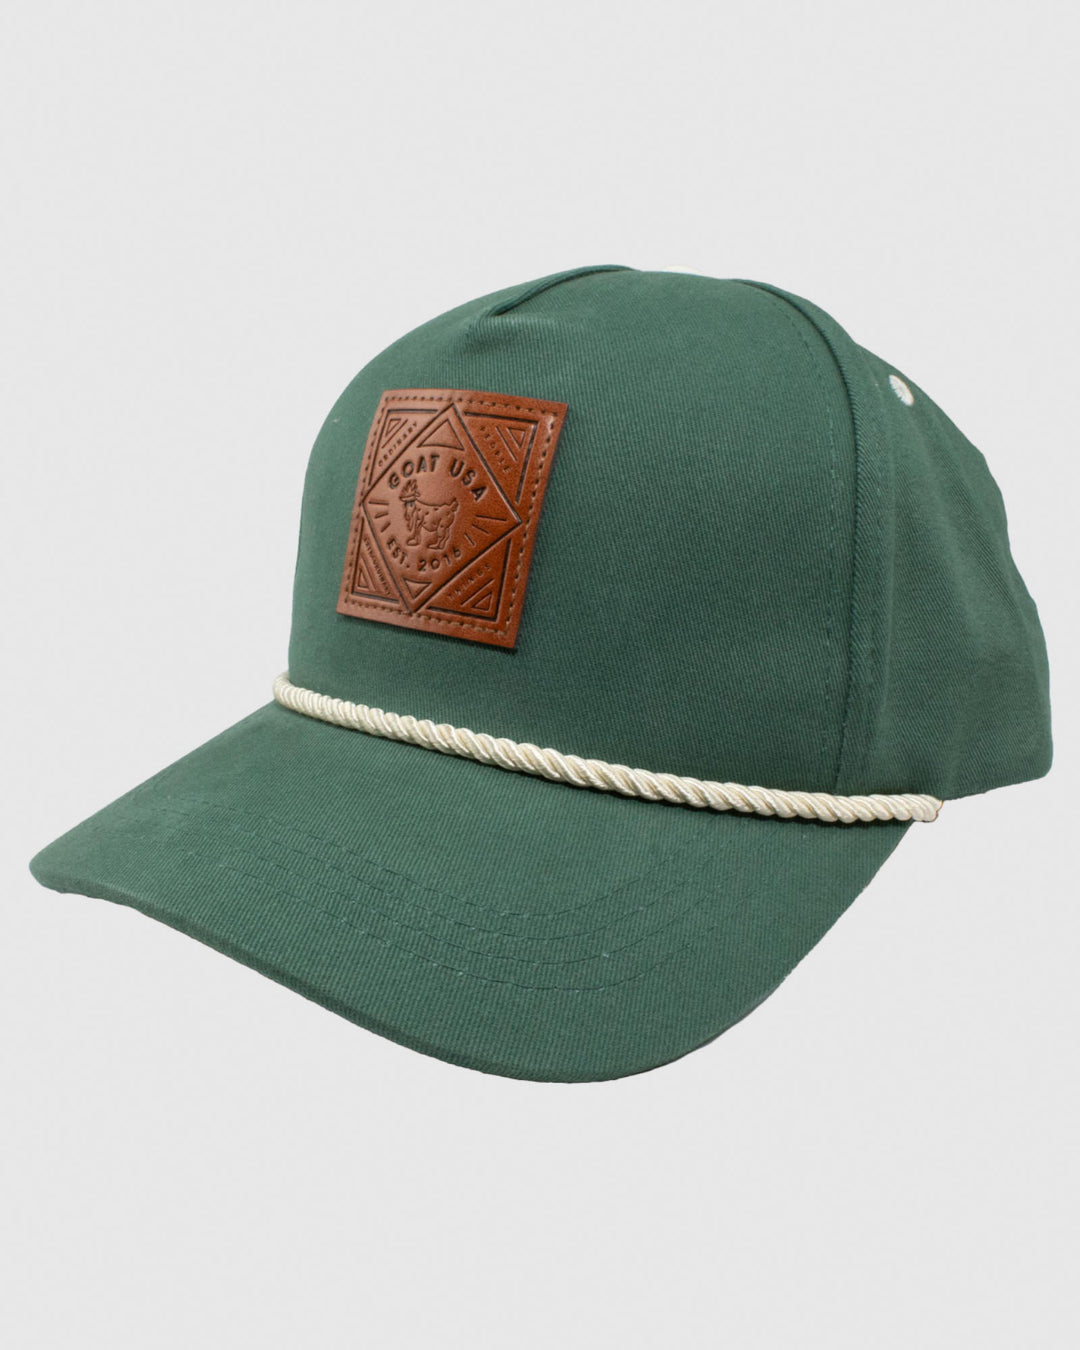 Front of green snapback with cream-colored rope and brown patch